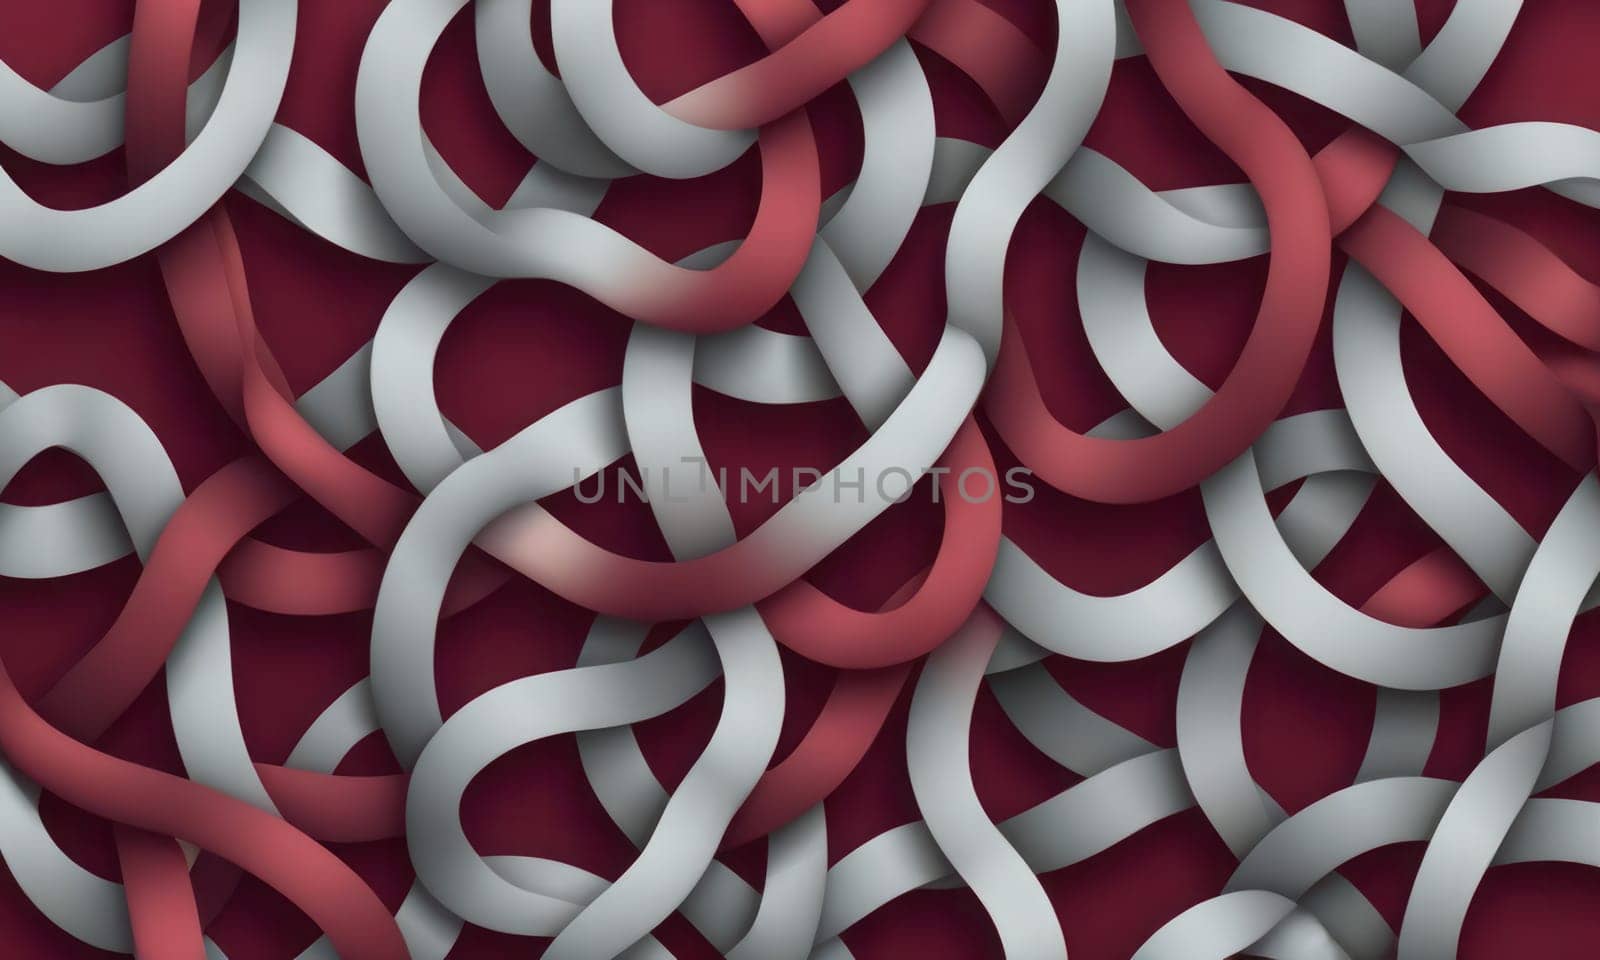 Knotted Shapes in Maroon Lightslategray by nkotlyar